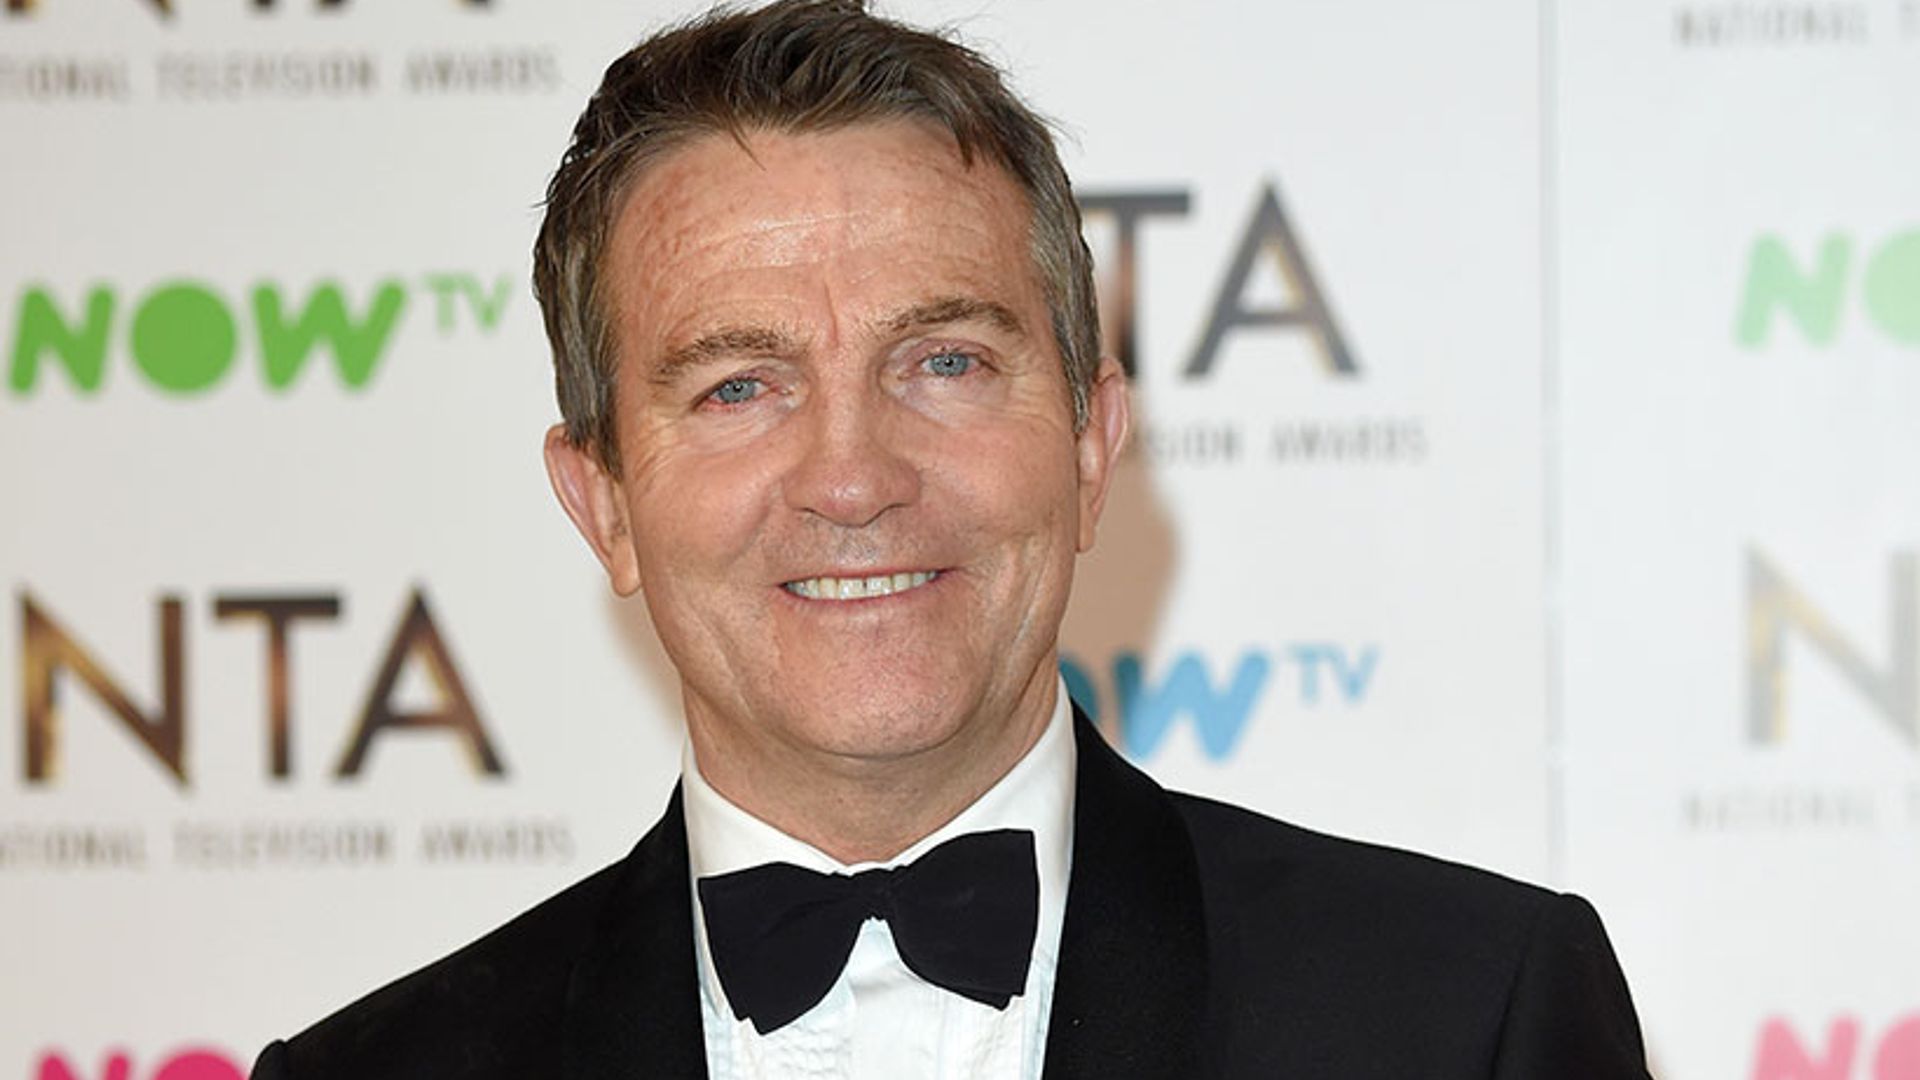 The Chase star Bradley Walsh reveals difficult health struggle